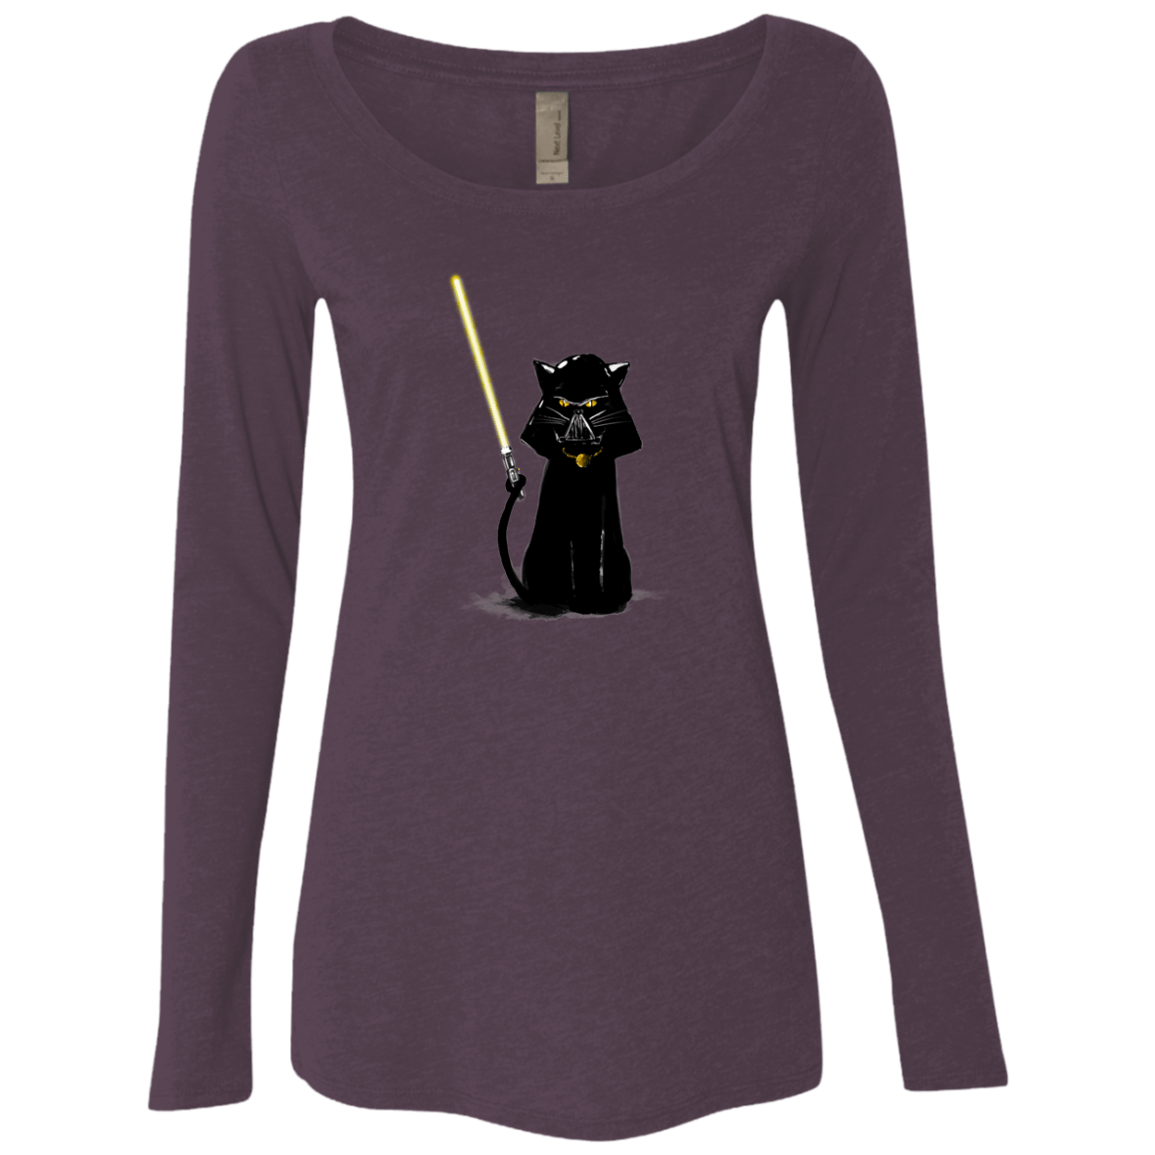 Jersey  Purple and black, Tops & tees, Women shopping